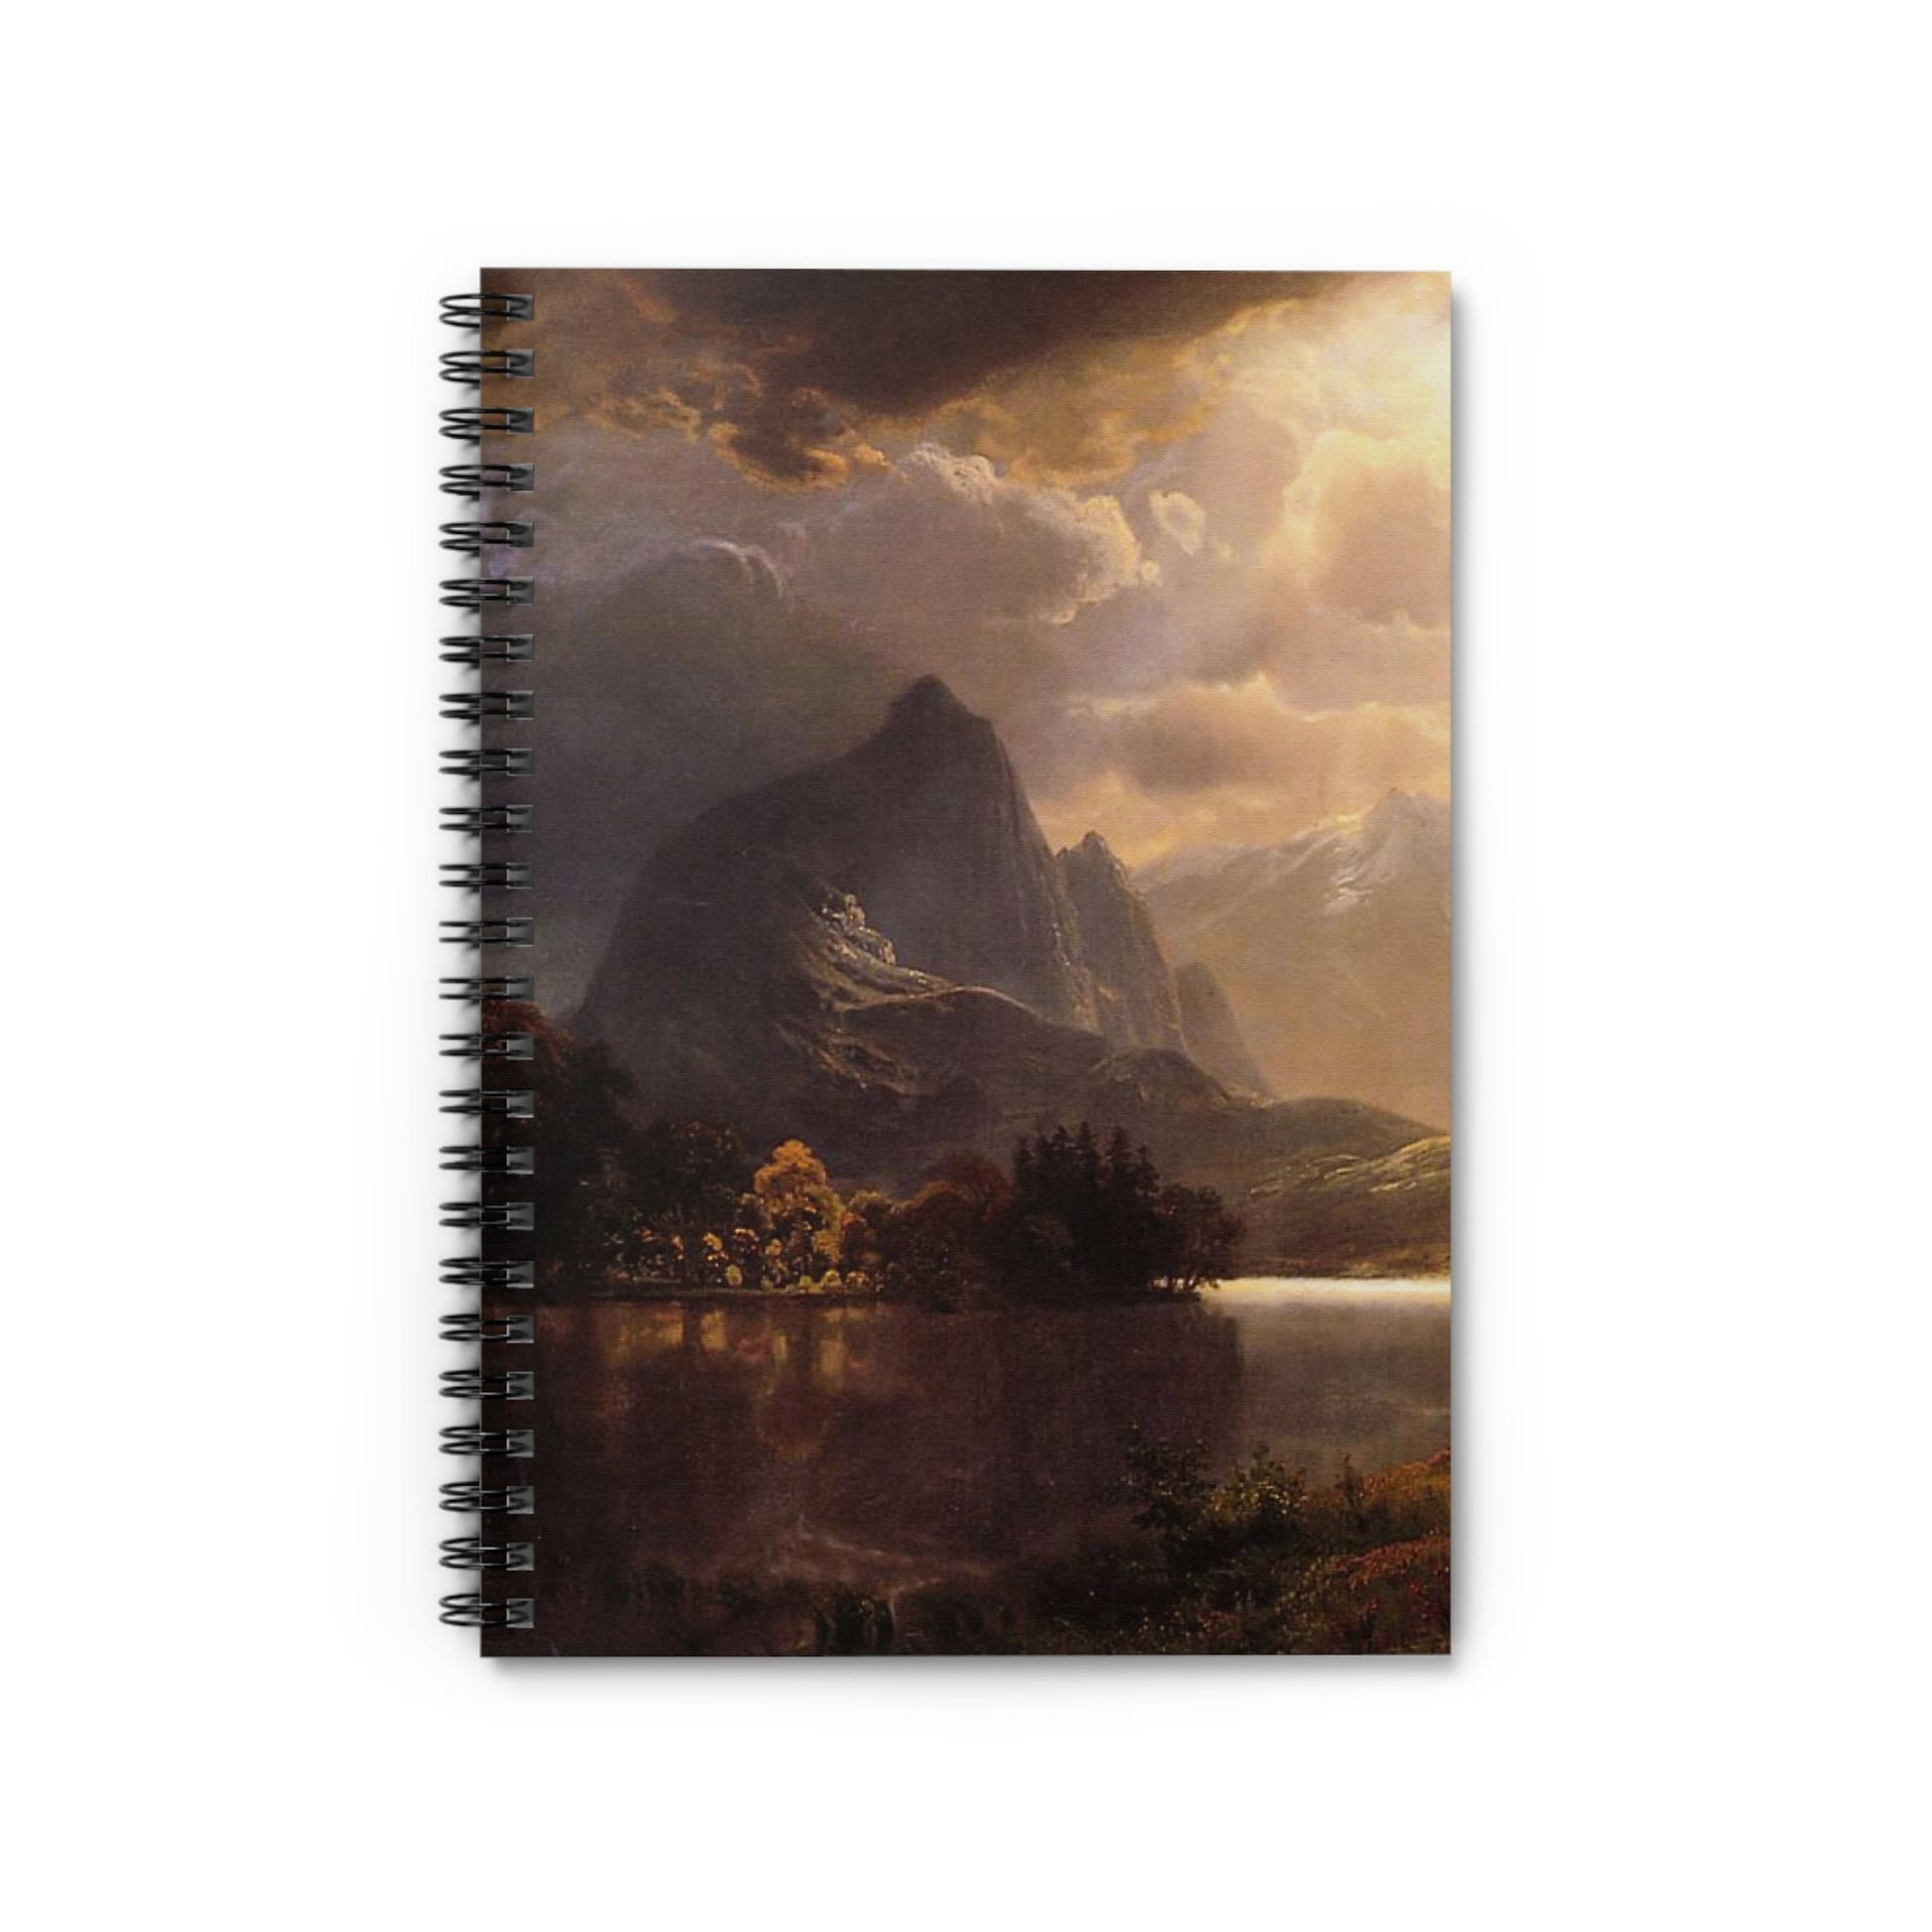 Ethereal Mountains Notebook with Estes Park Colorado cover, perfect for journaling and planning, featuring ethereal mountain scenes from Estes Park, Colorado.